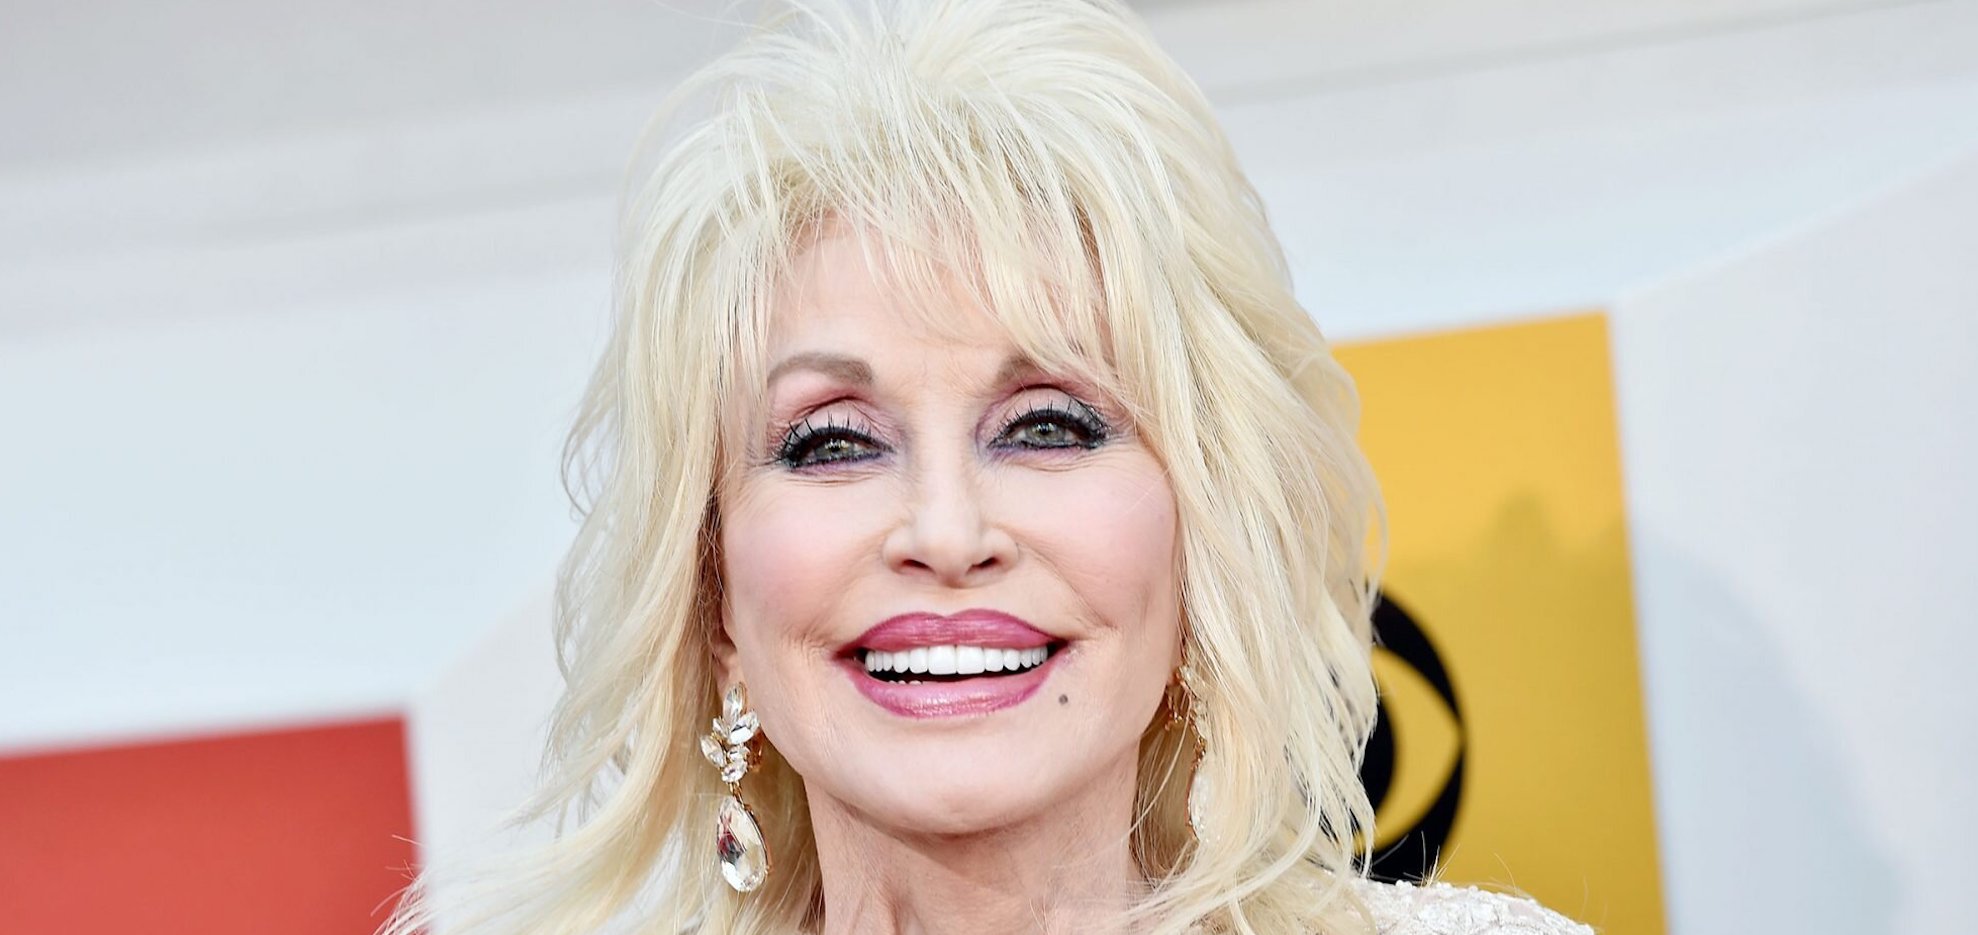 Dolly Parton Releases New Single, “Big Dreams and Faded Jeans” Ahead of New LP and Novel, ‘Run, Rose Run’